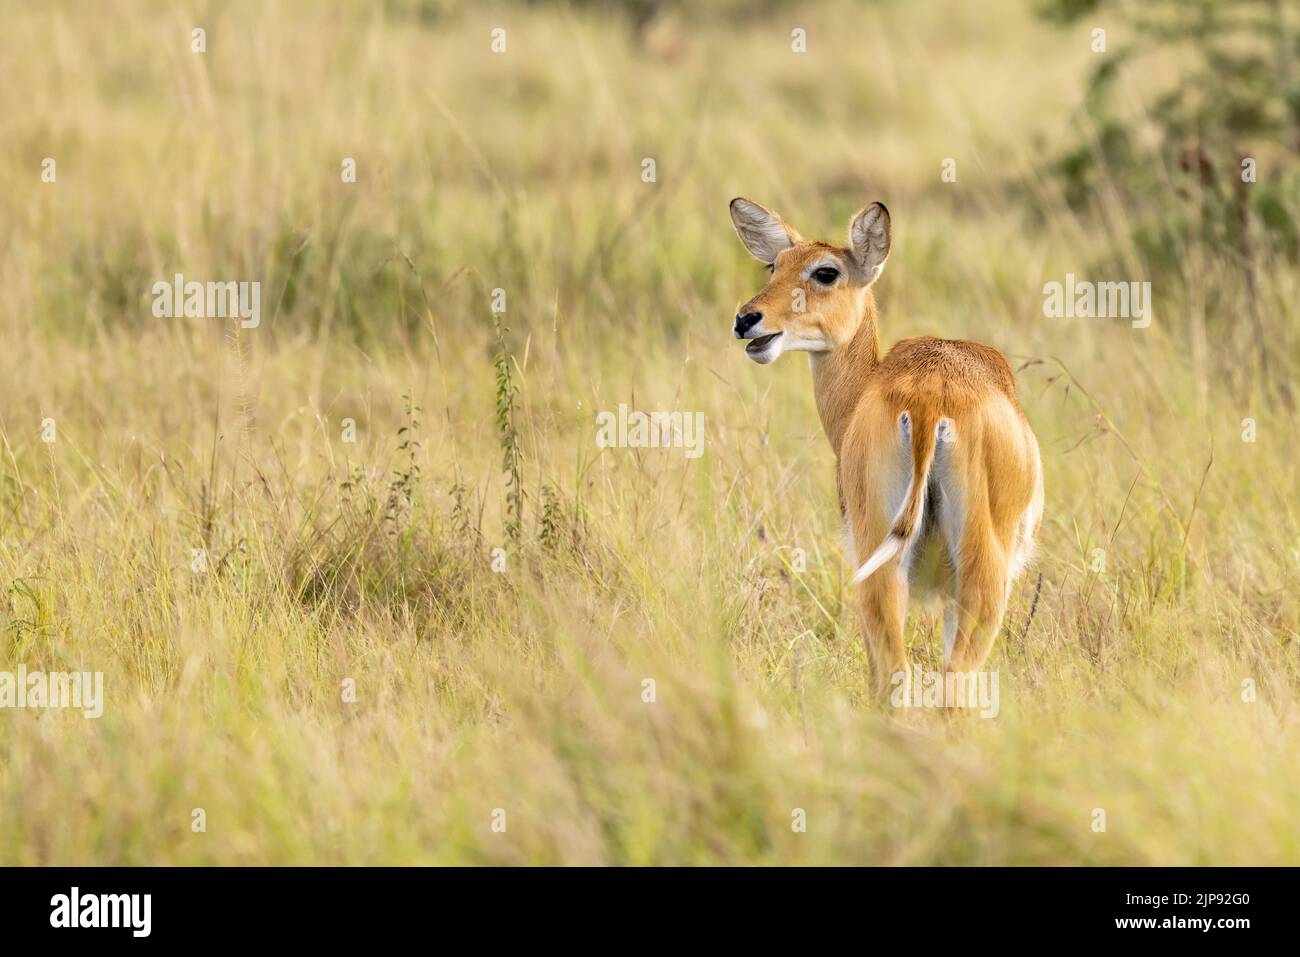 An adult female Ugandan kob antelope, kobus kob thomasi, in Queen Elizabeth National Park, Ugandan. Female kobs are sociable and live in small herds w Stock Photo